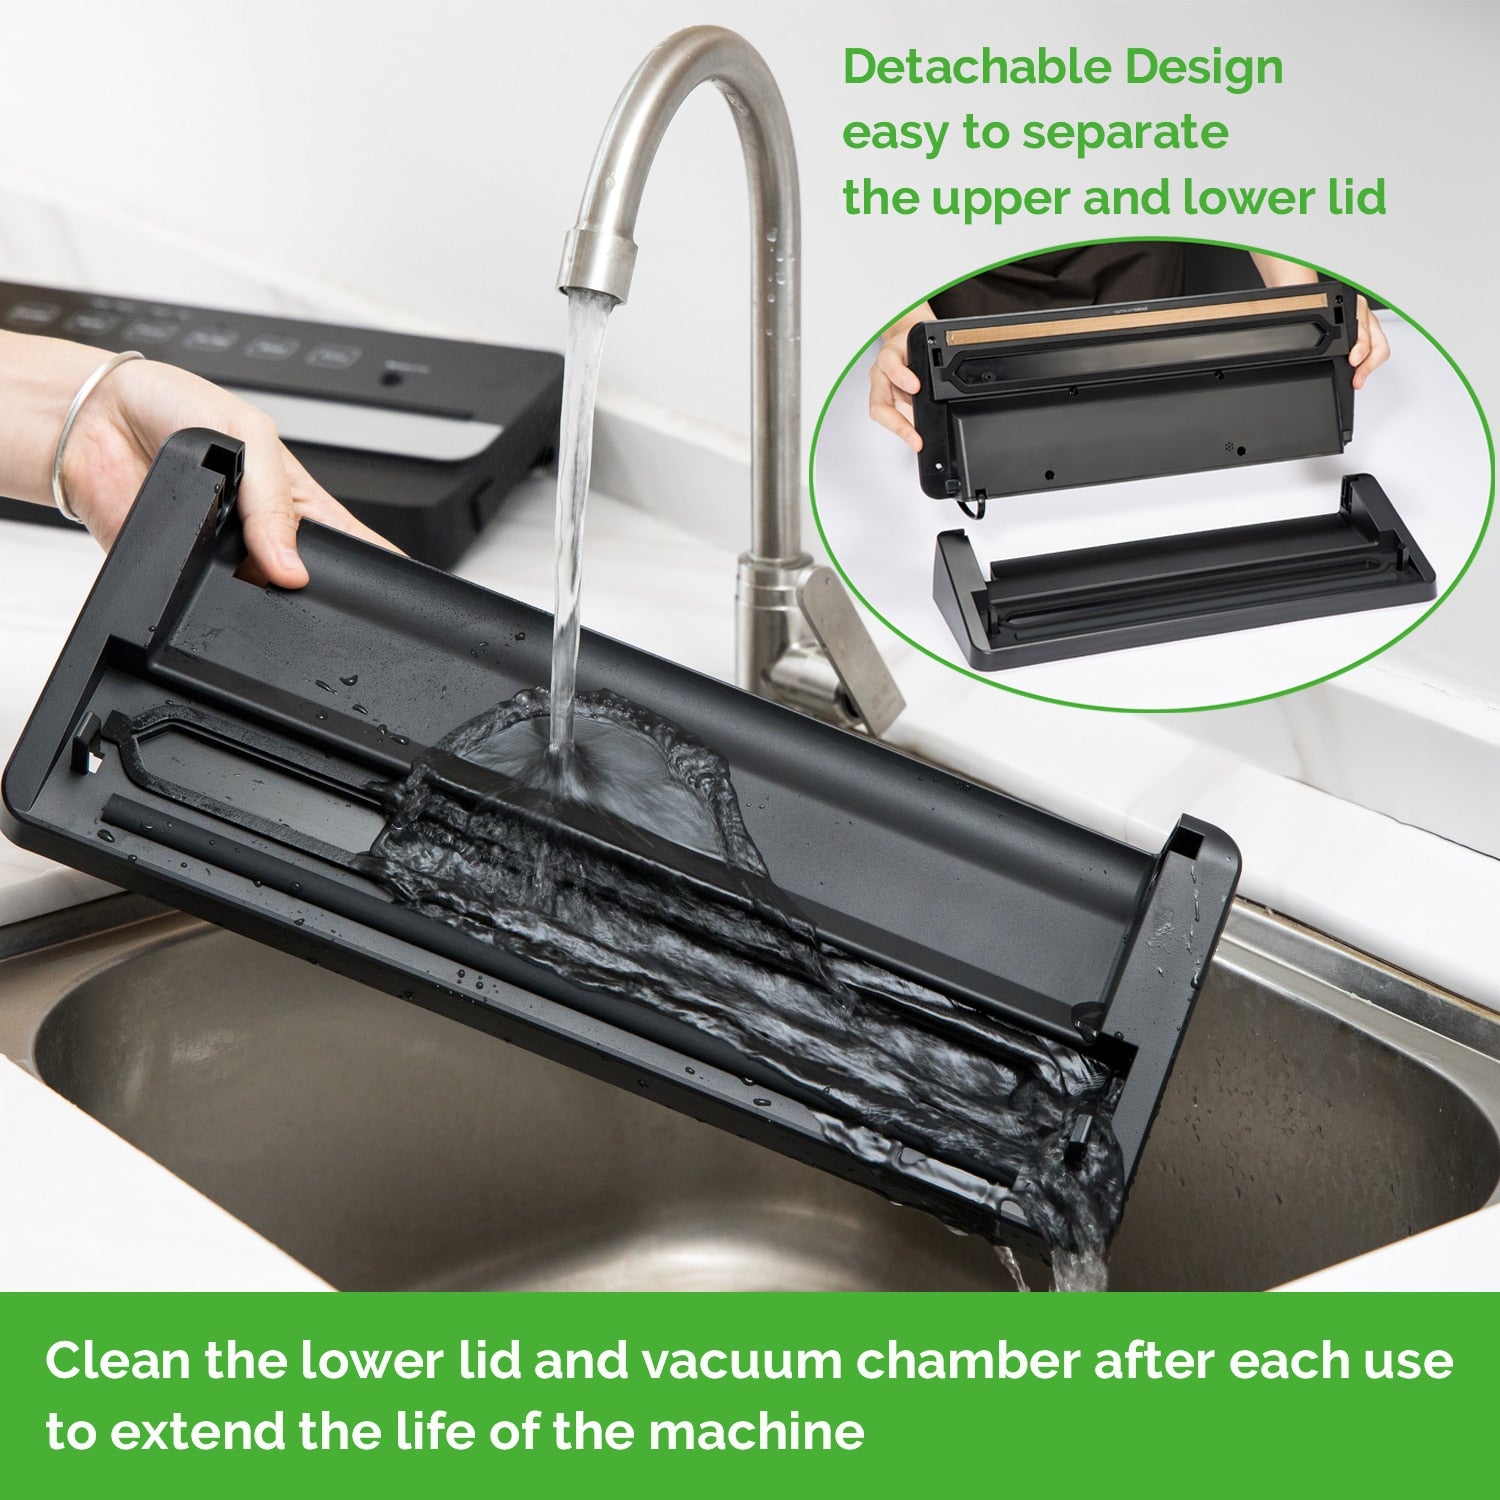 Automatic Vacuum Sealer detachable design easy to separate the upper and lower lid. Showing it can be easily placed under a running tap for maximum cleaning efficiency